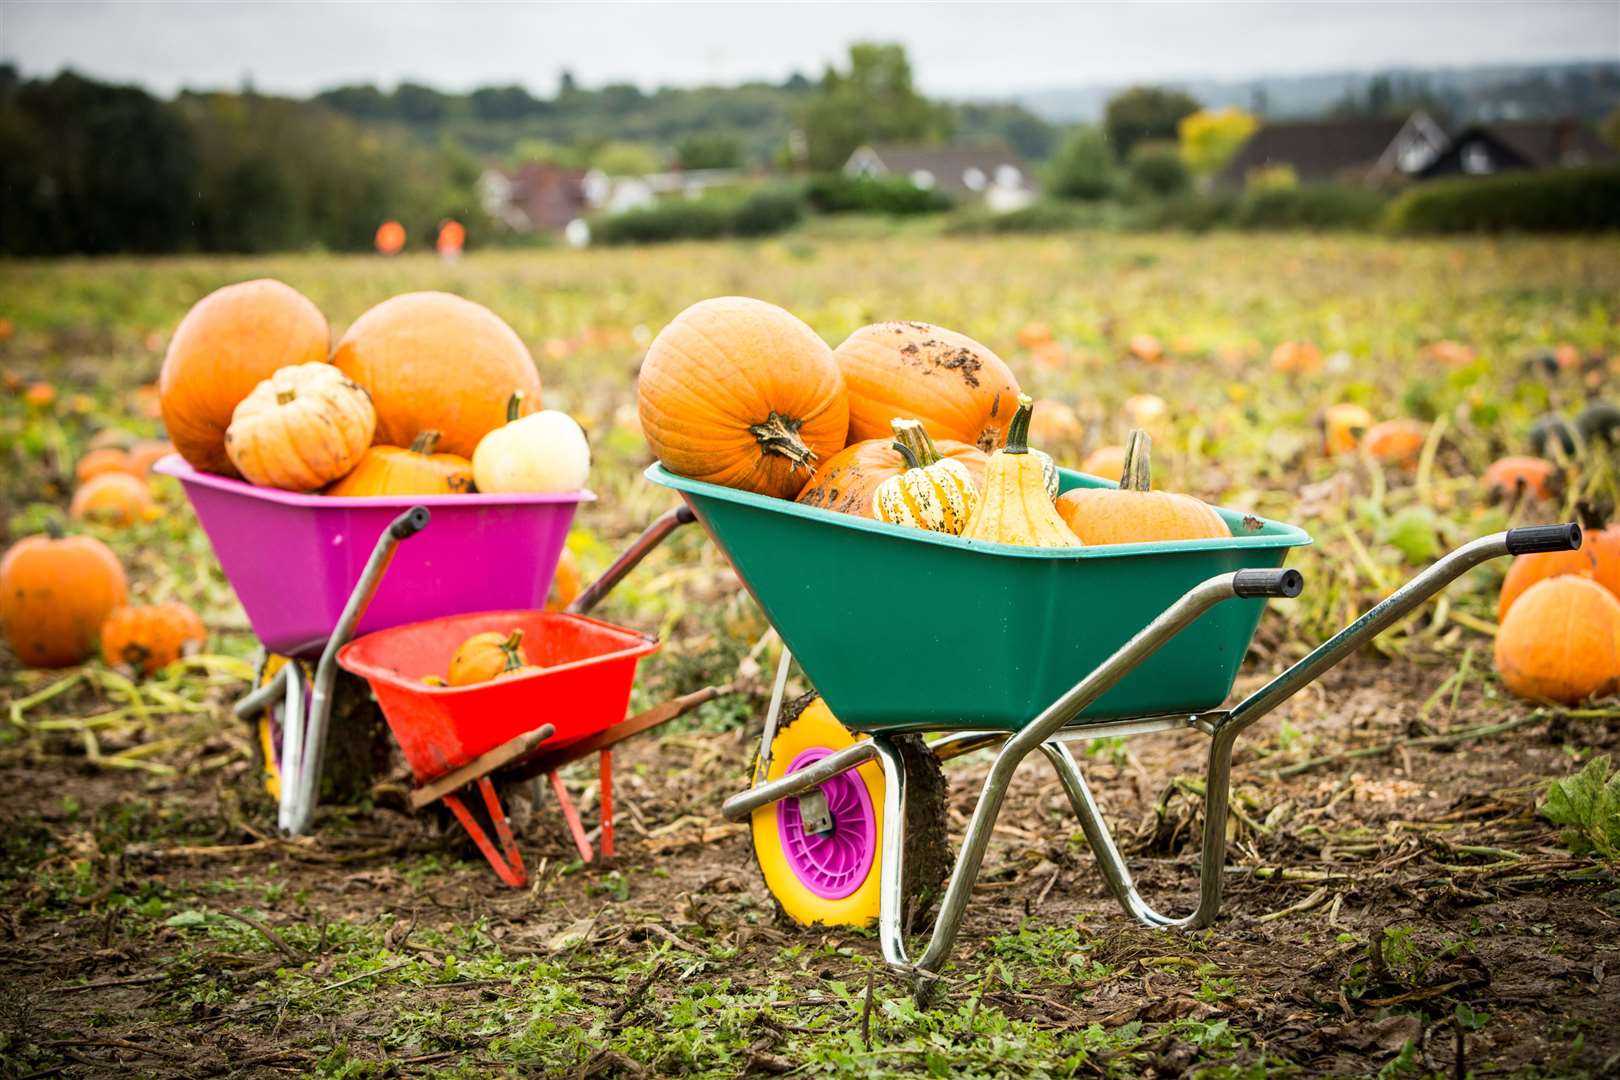 Pumpkin Moon attract visitors to their farms with maize mazes and pumpkin patches. Picture: Matthew Walker